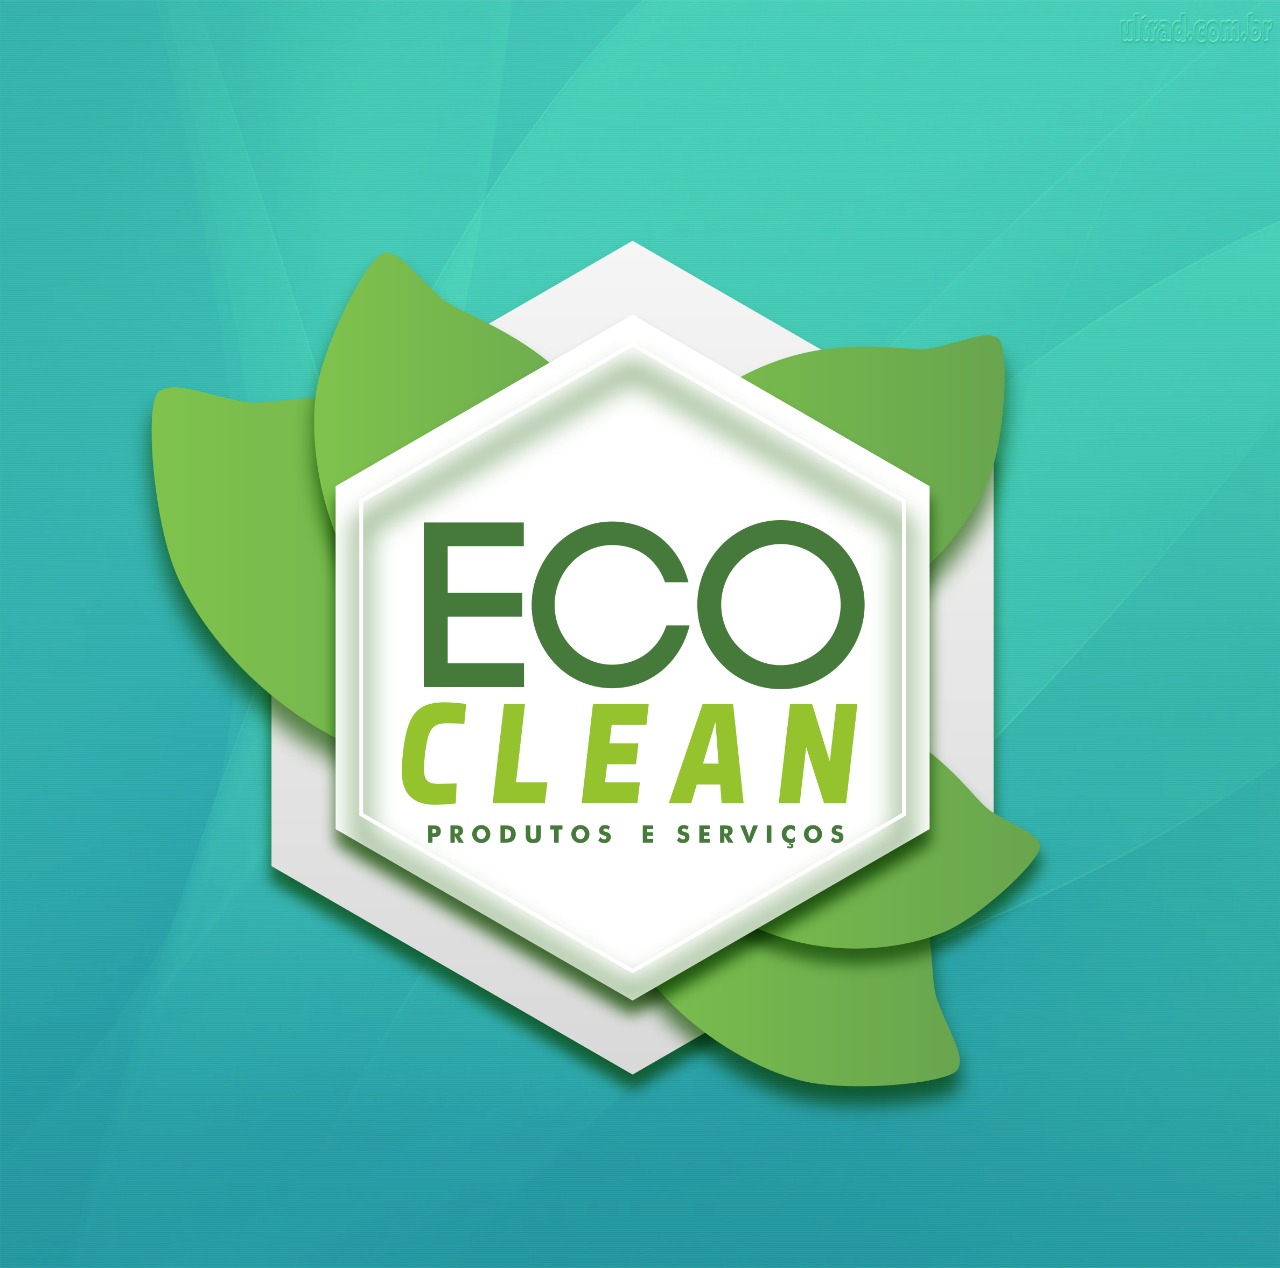 Eco Clean